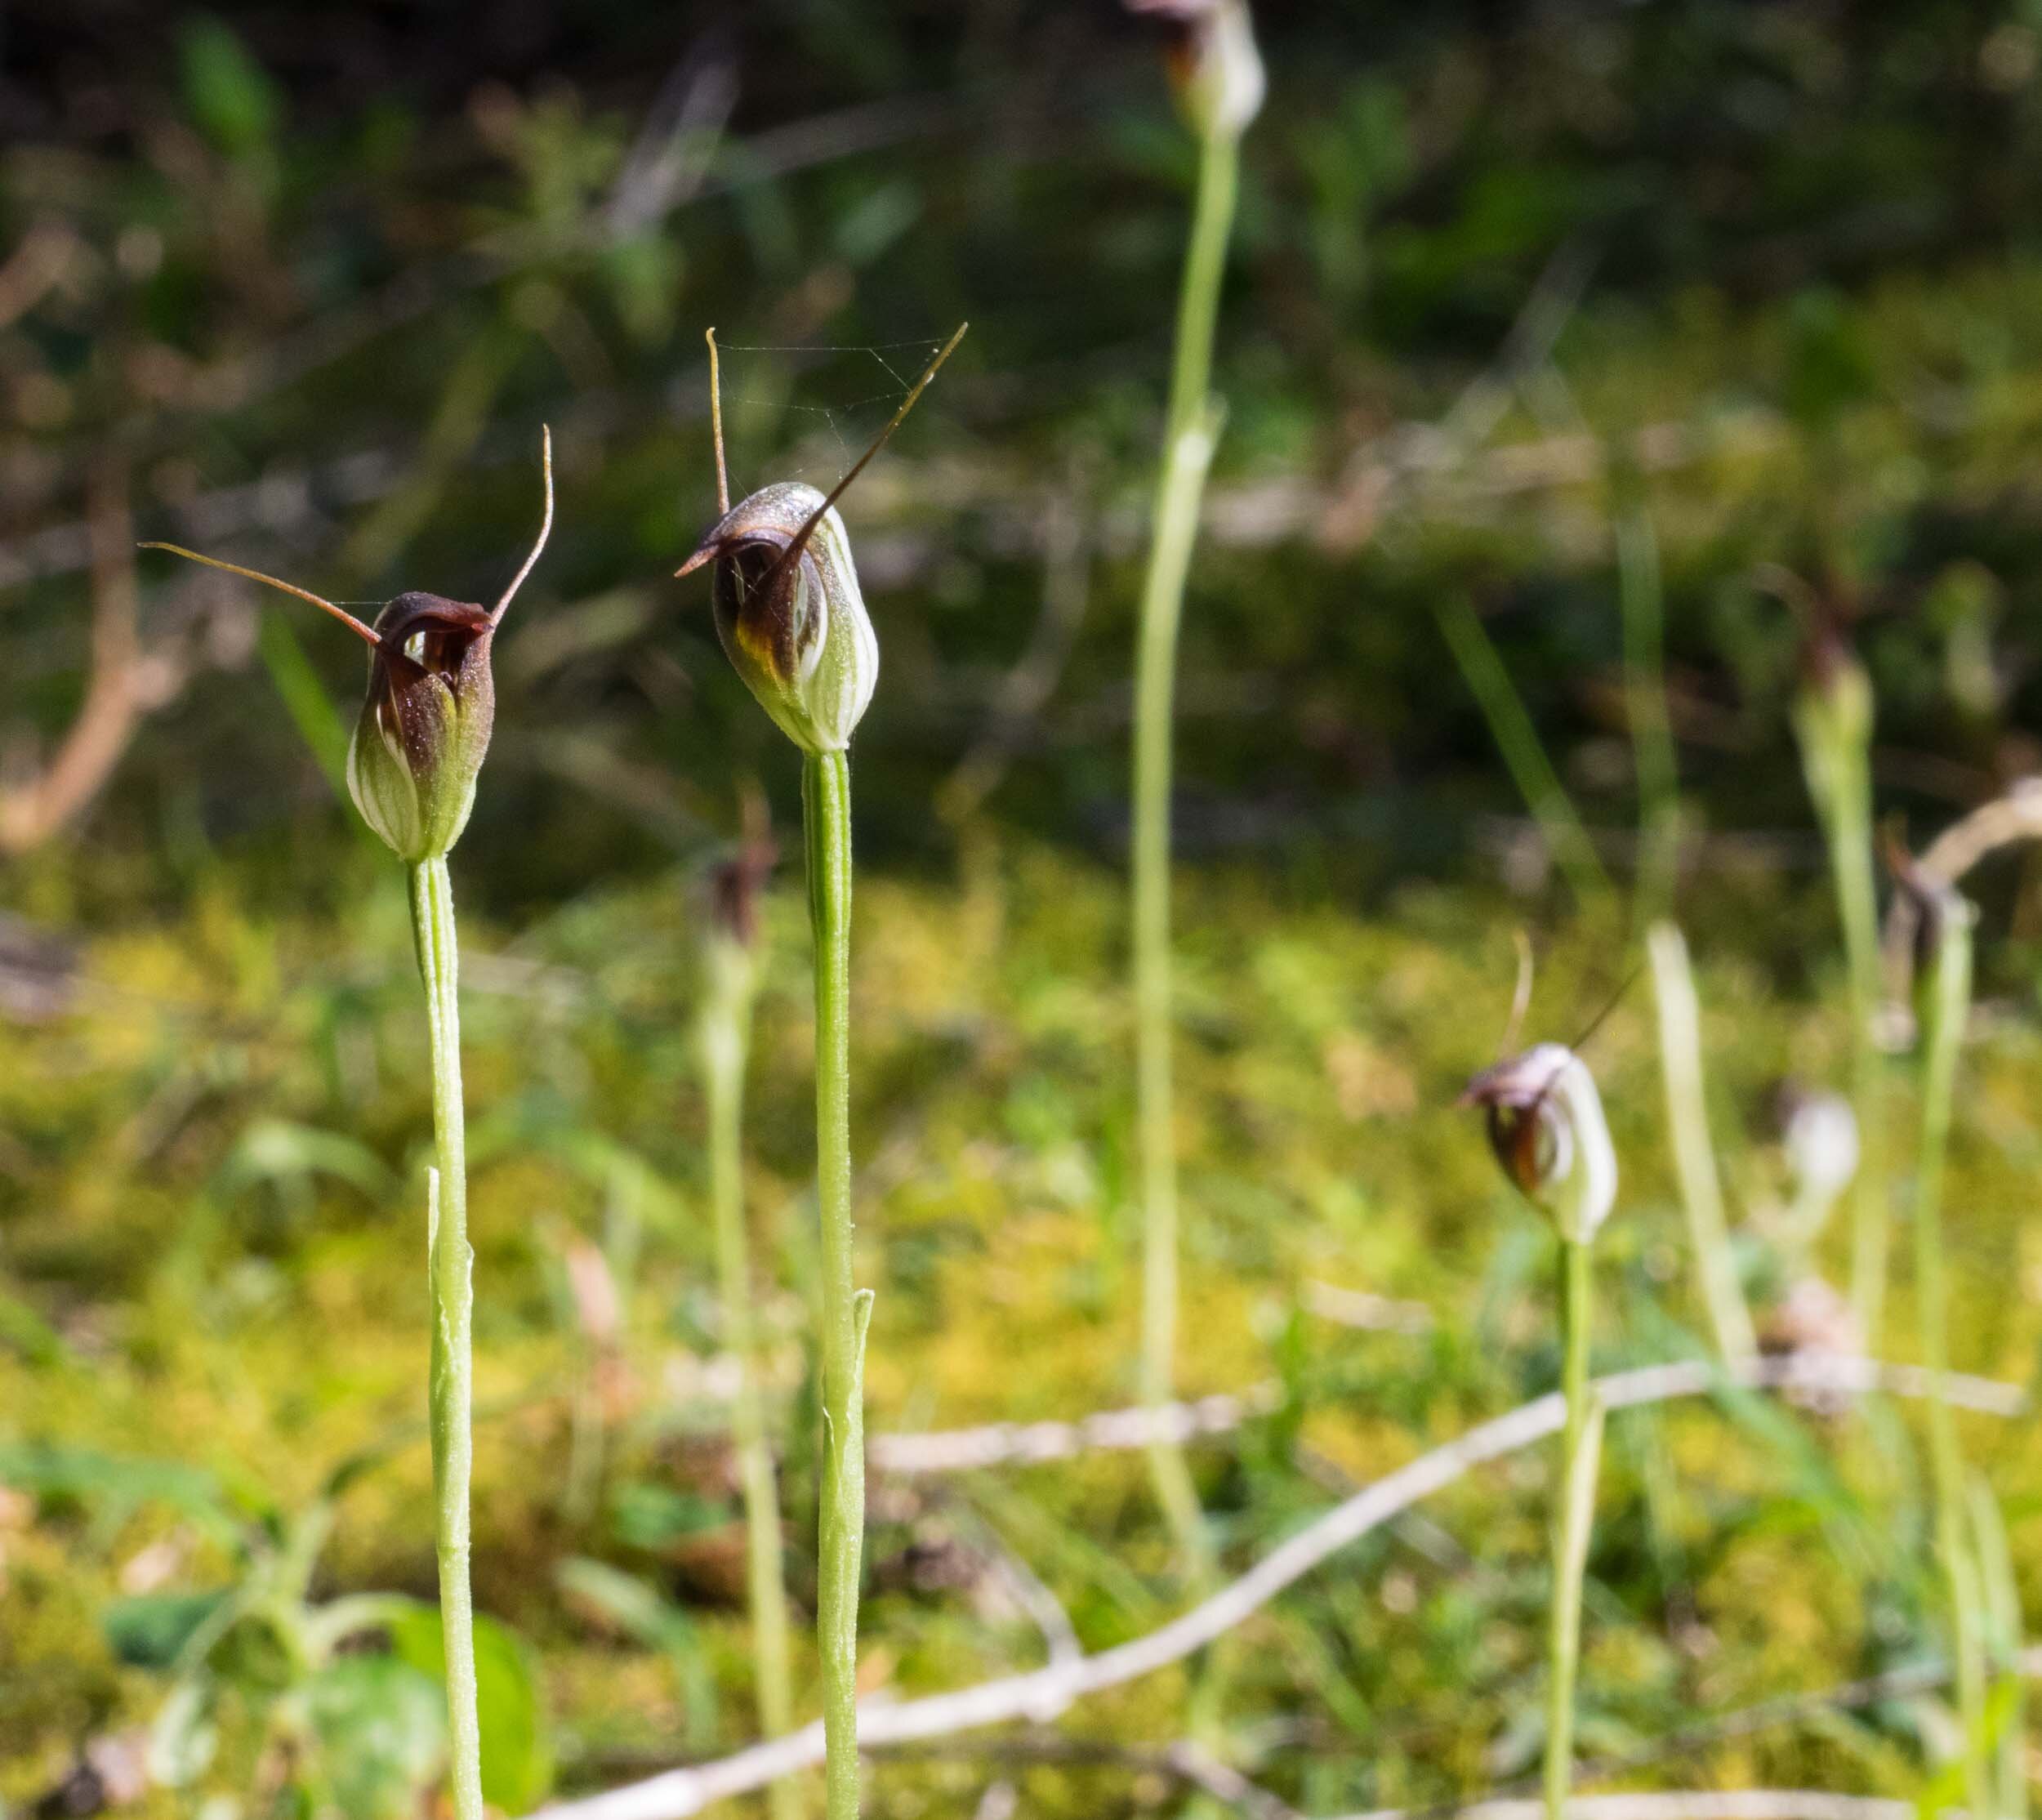 Pterostylis - often found in large colonies